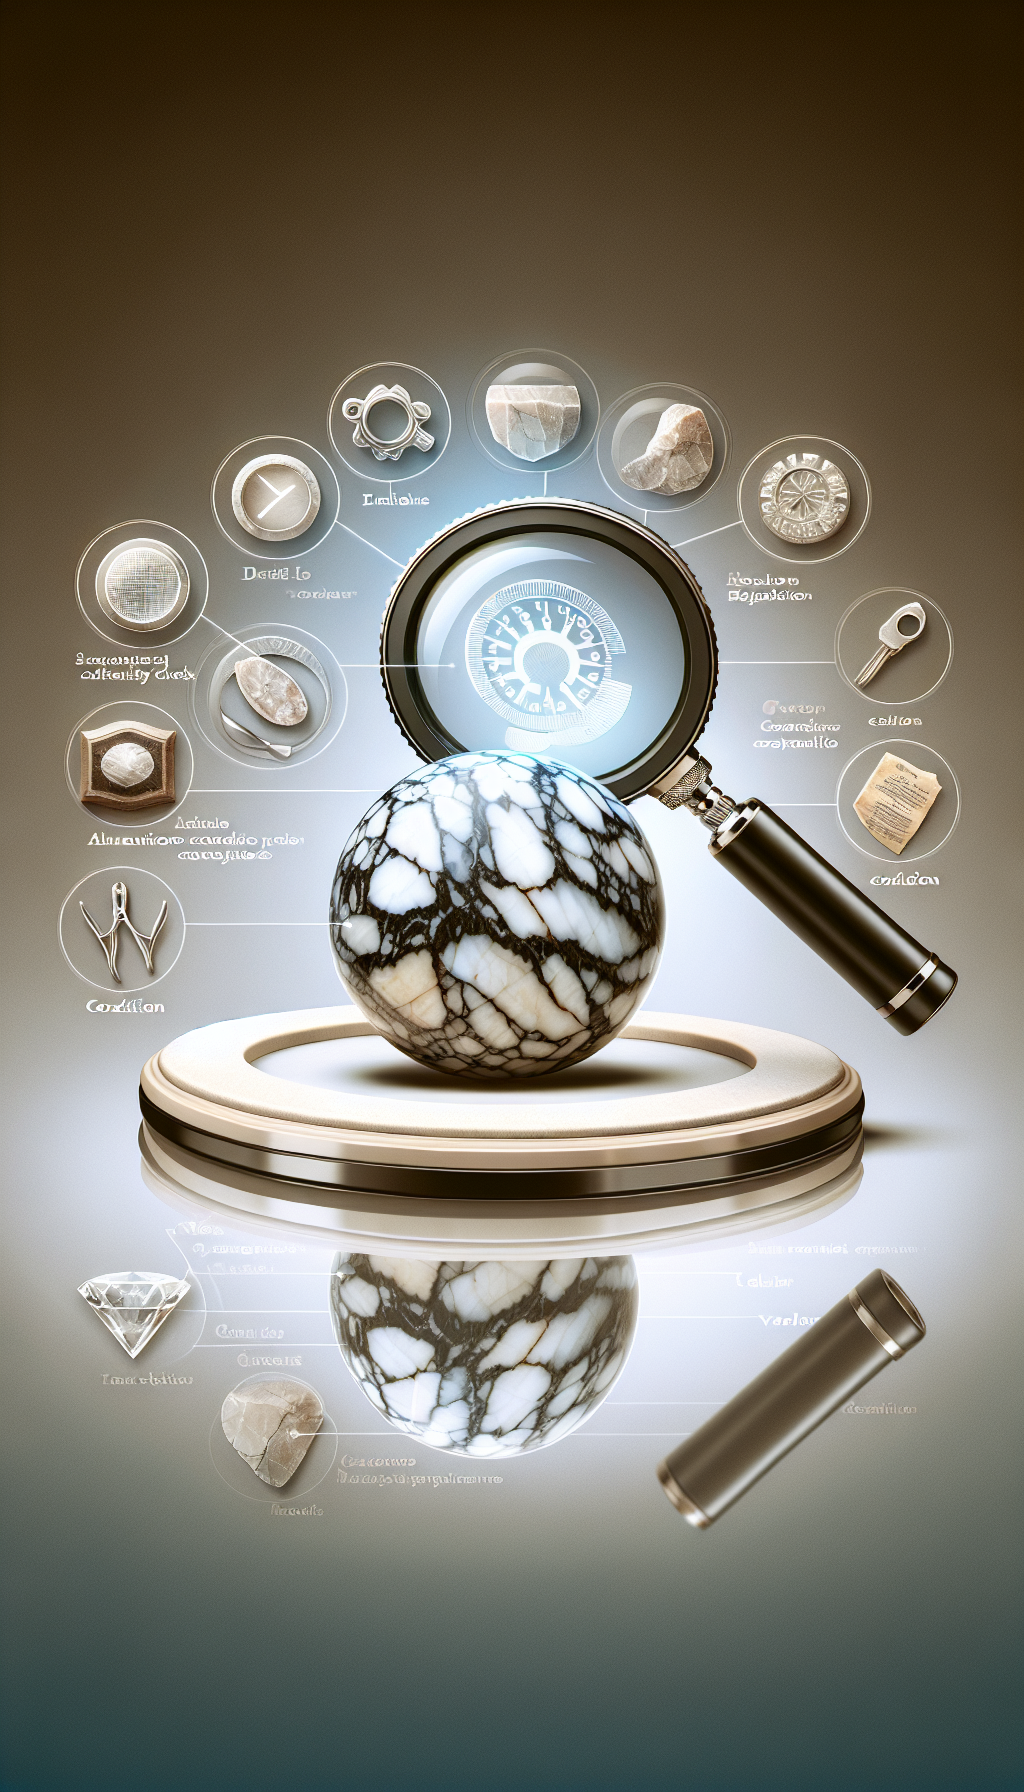 An illustration showcasing an antique marble magnified under a jeweler's loupe, revealing intricate vein patterns and subtle color variations. Around the sphere, transparent icons depict a UV light for authenticity checks, a tiny crack indicating condition, and a faded price tag symbolizing value. The marble's reflection on a sleek surface hints at its history and rarity, enveloping the essence of valuation factors.